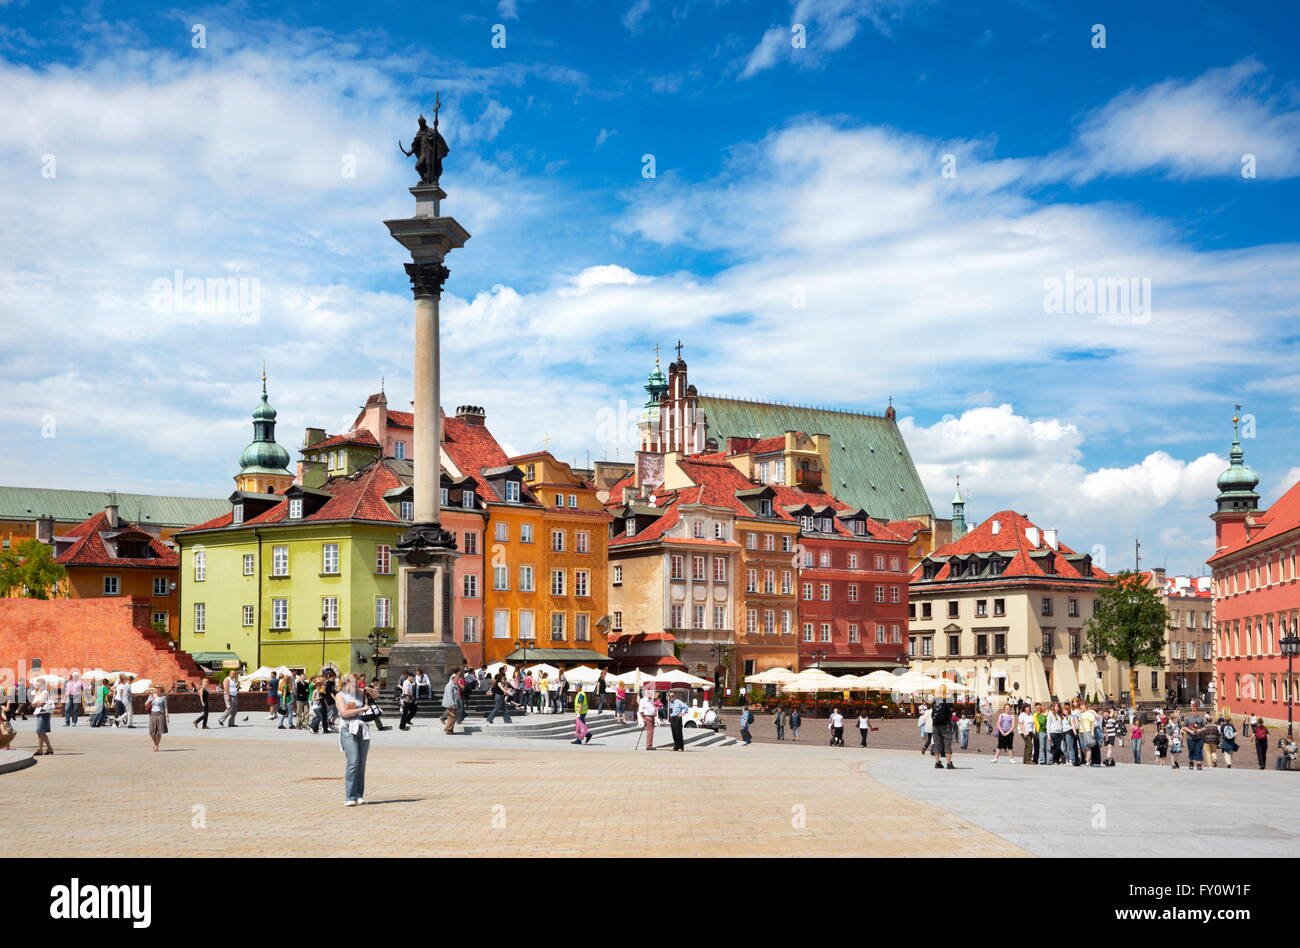 Warsaw Old Town - The Castle Square, Warsaw, Poland Stock Photo